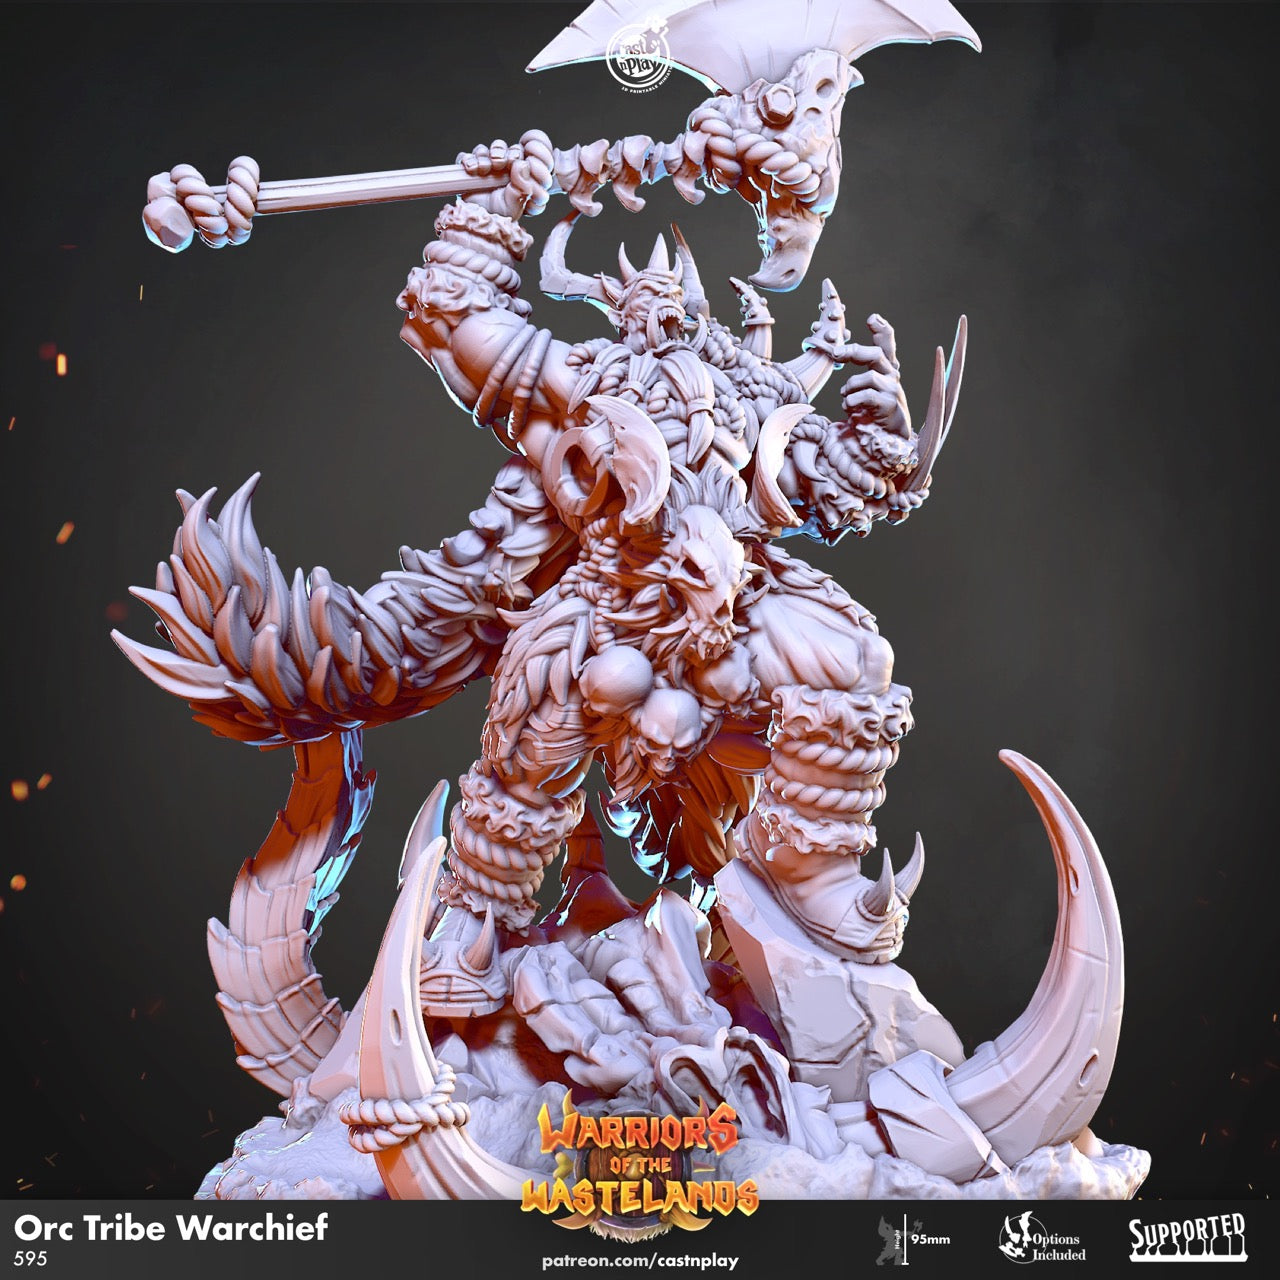 Orc Tribe Warchief miniature sculpted by Cast n Play